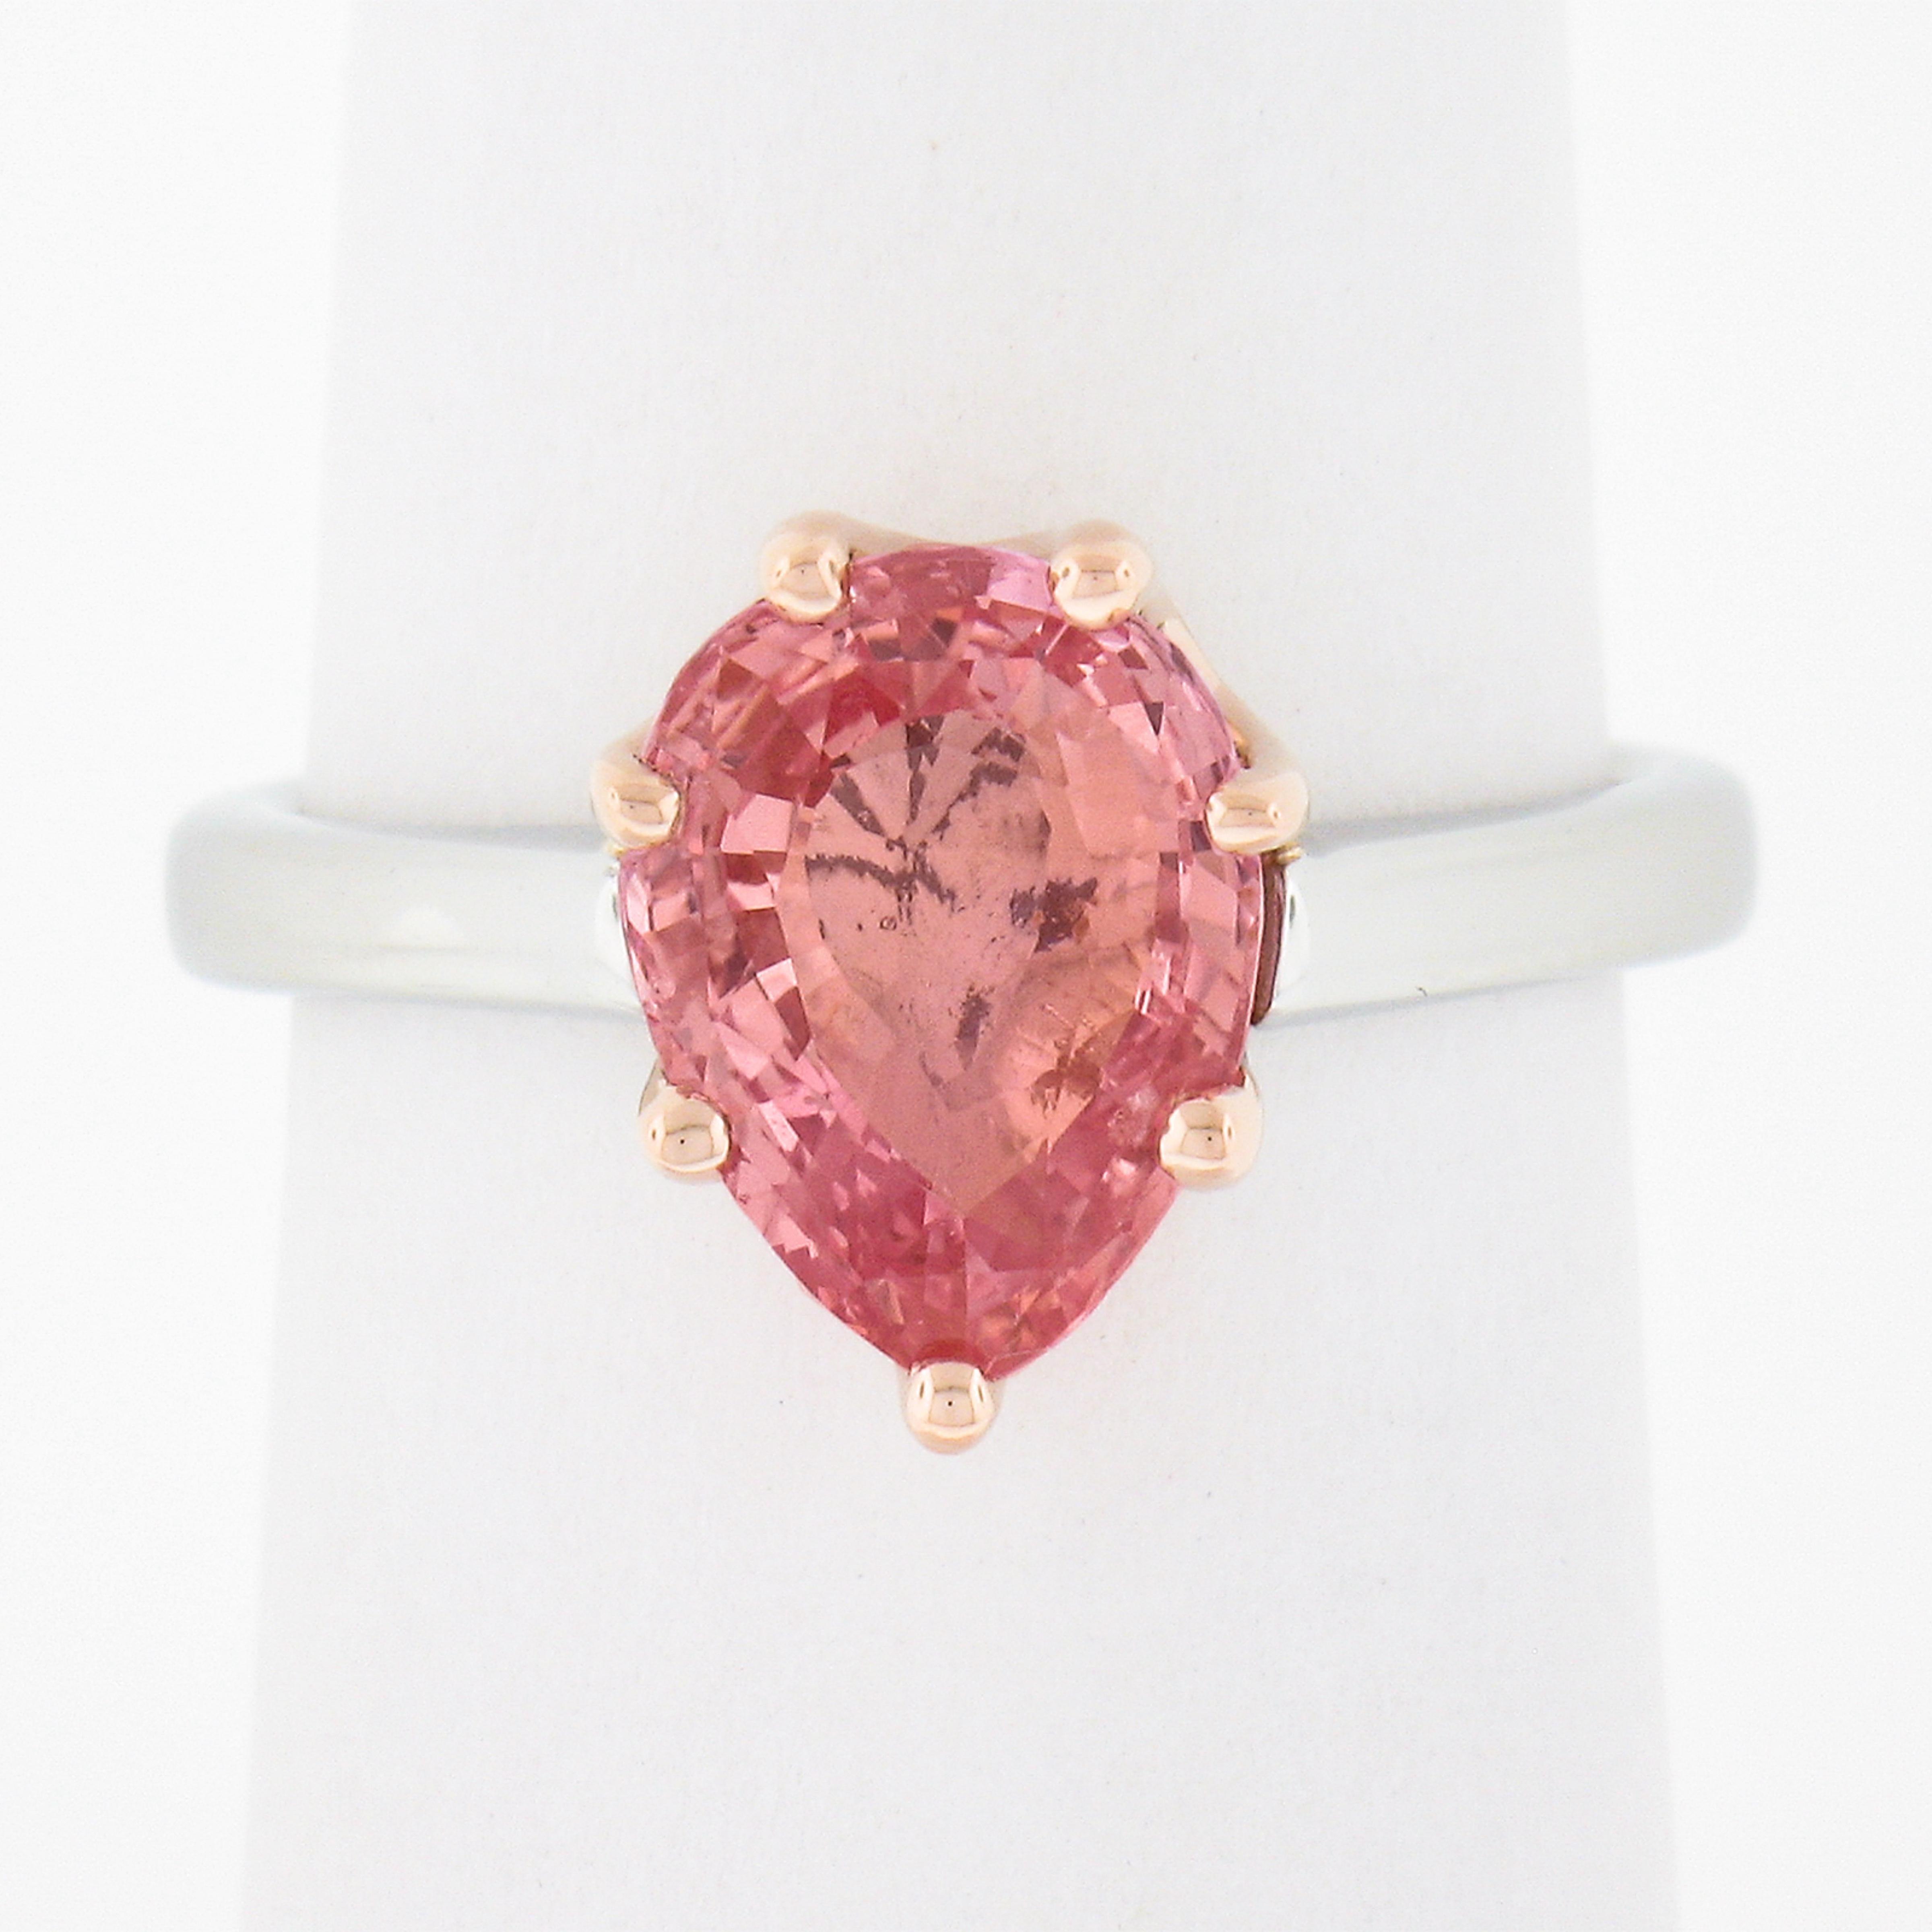 Here we have a gorgeous sapphire solitaire engagement ring that was newly crafted from solid platinum shank & 14k rose gold scalloped basket. The center stone is a pear brilliant cut 2.51 carat GIA certified MAGNIFICENT Padparadscha orange-pink